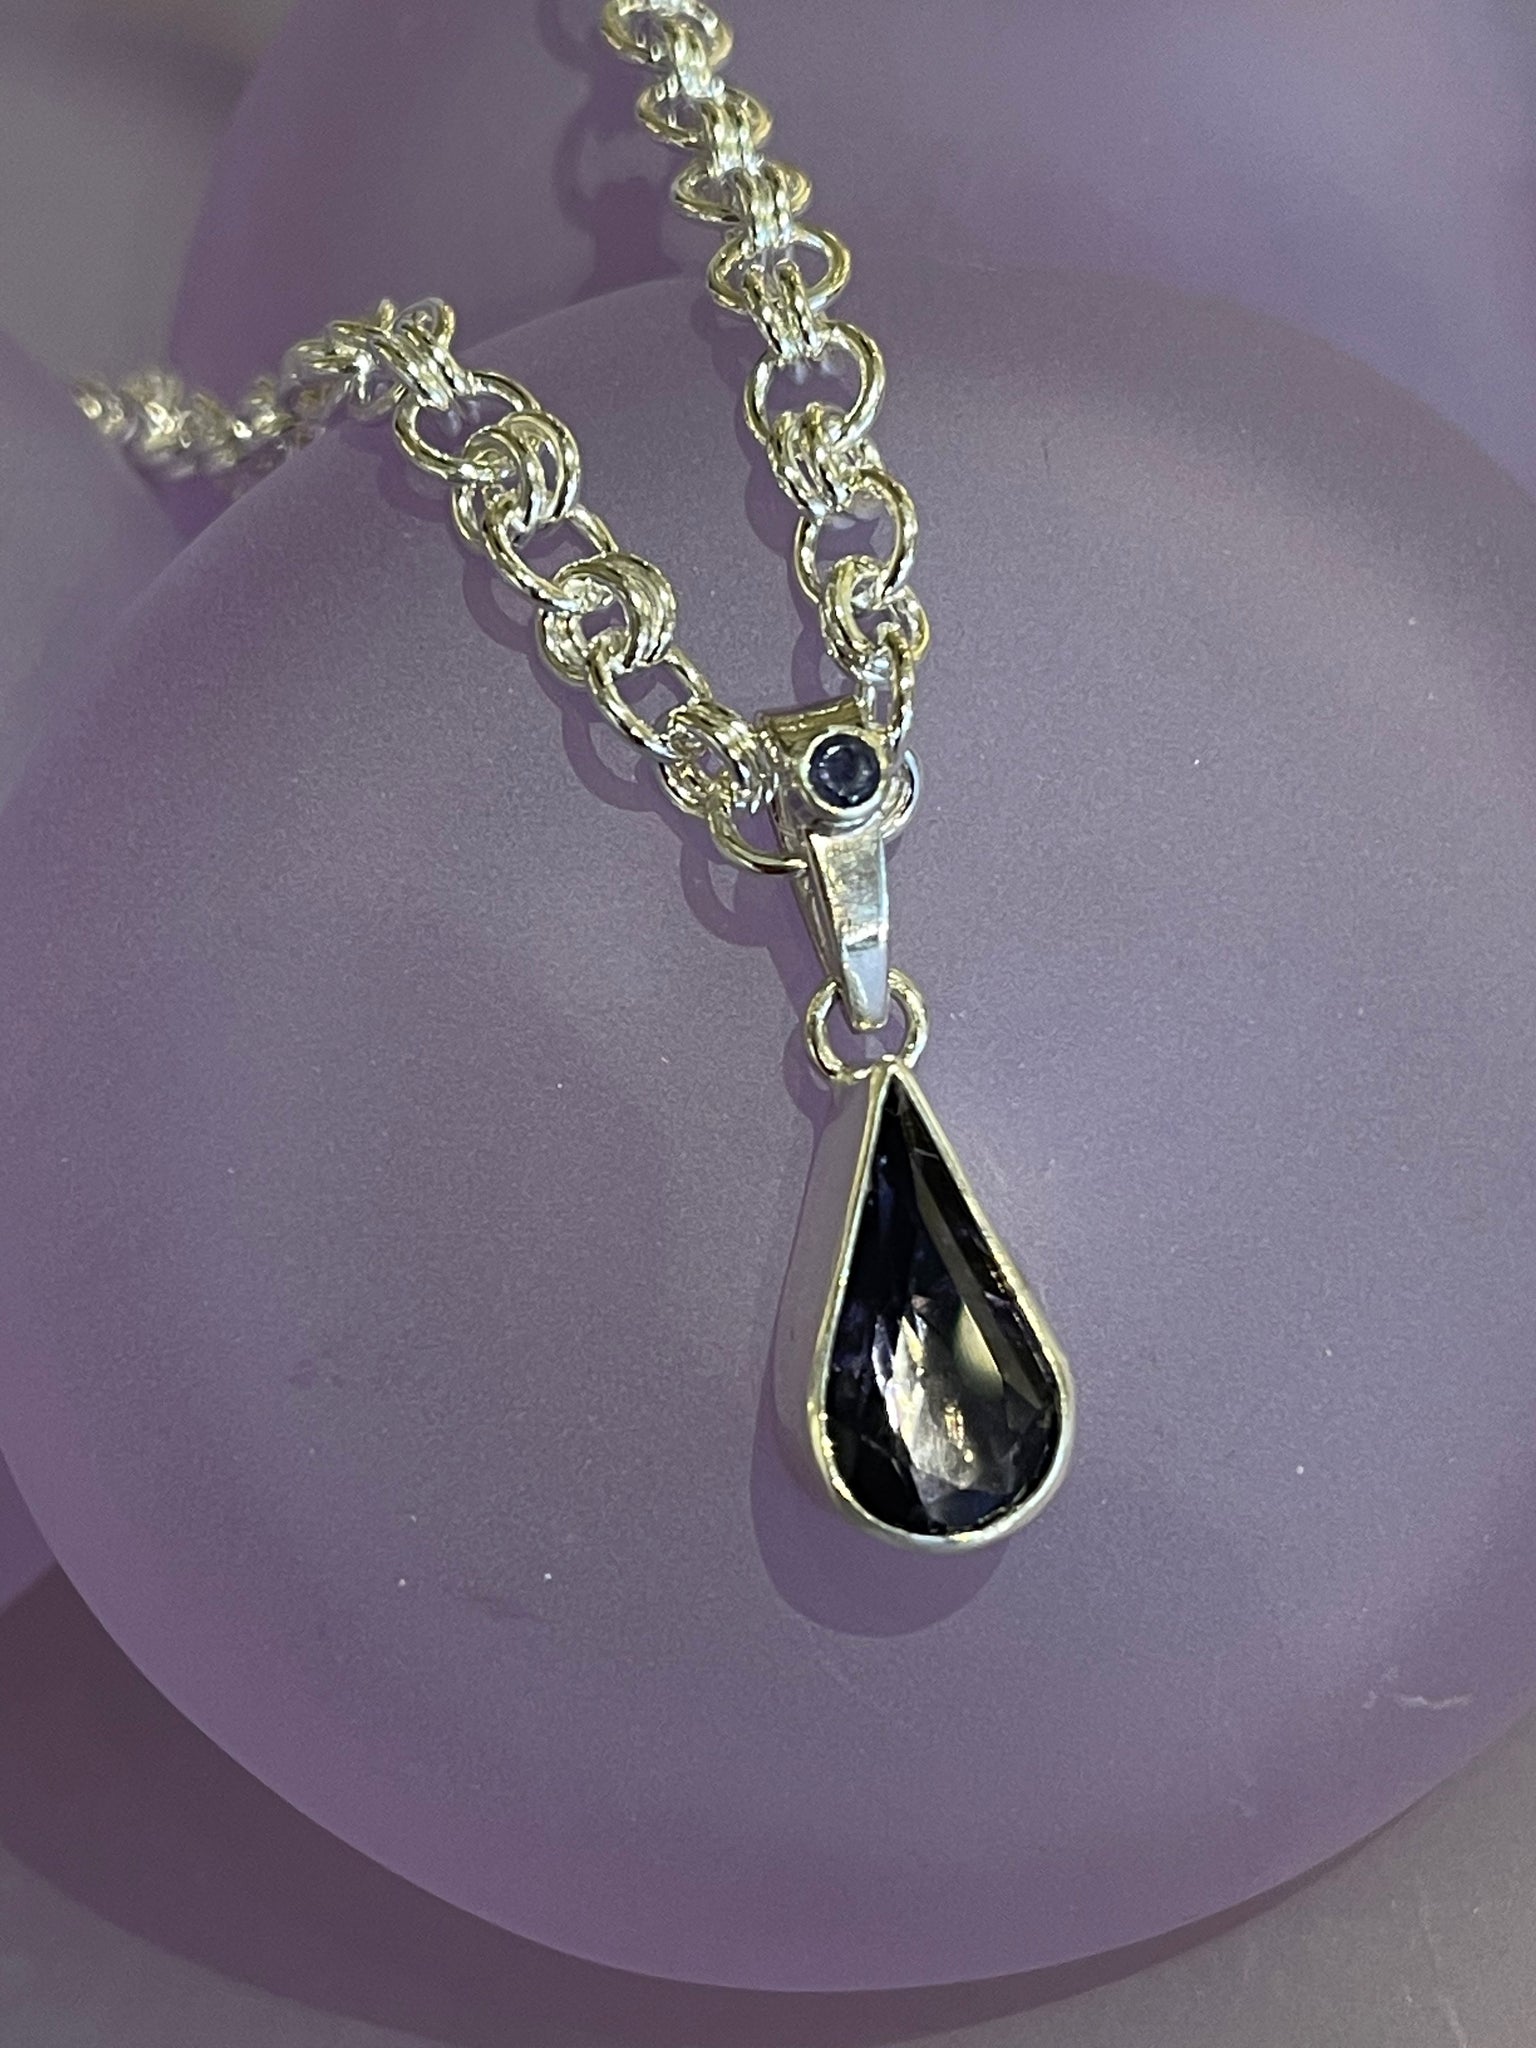 Pear Shaped Iolite Pendant Necklace with Sterling Silver Handmade Chain